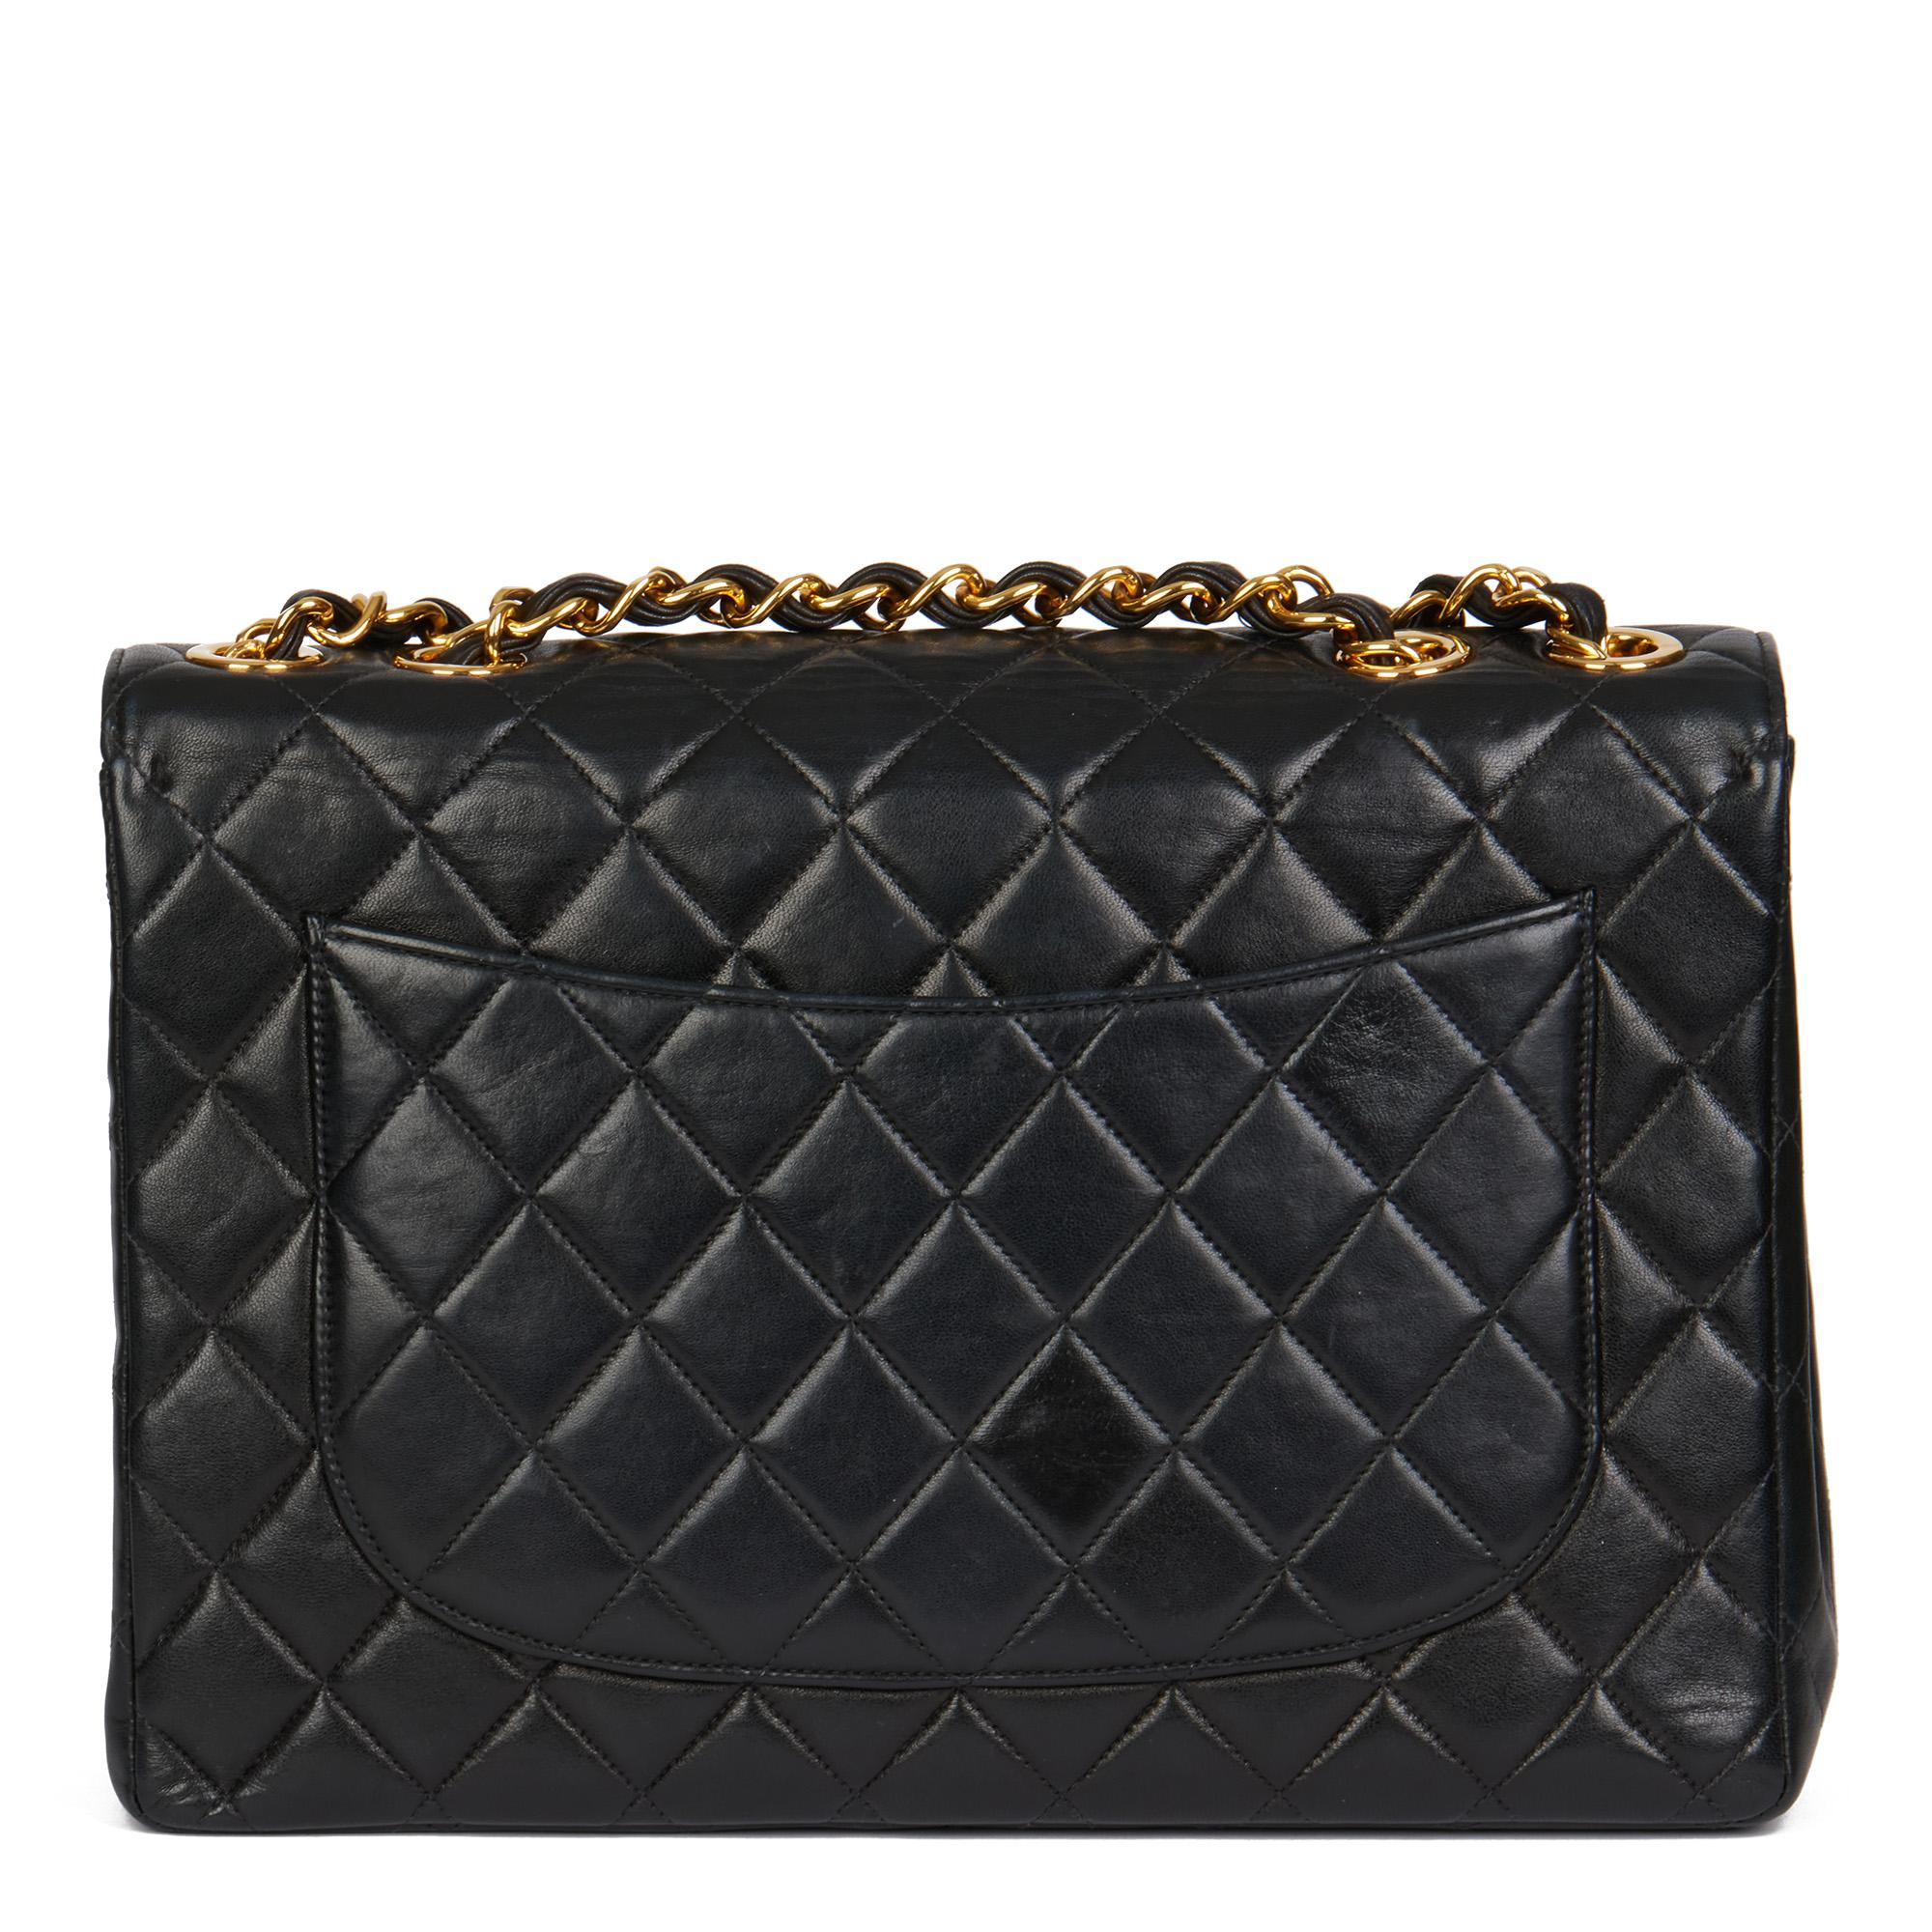 CHANEL Black Quilted Lambskin Vintage Jumbo XL Classic Single Flap Bag 1